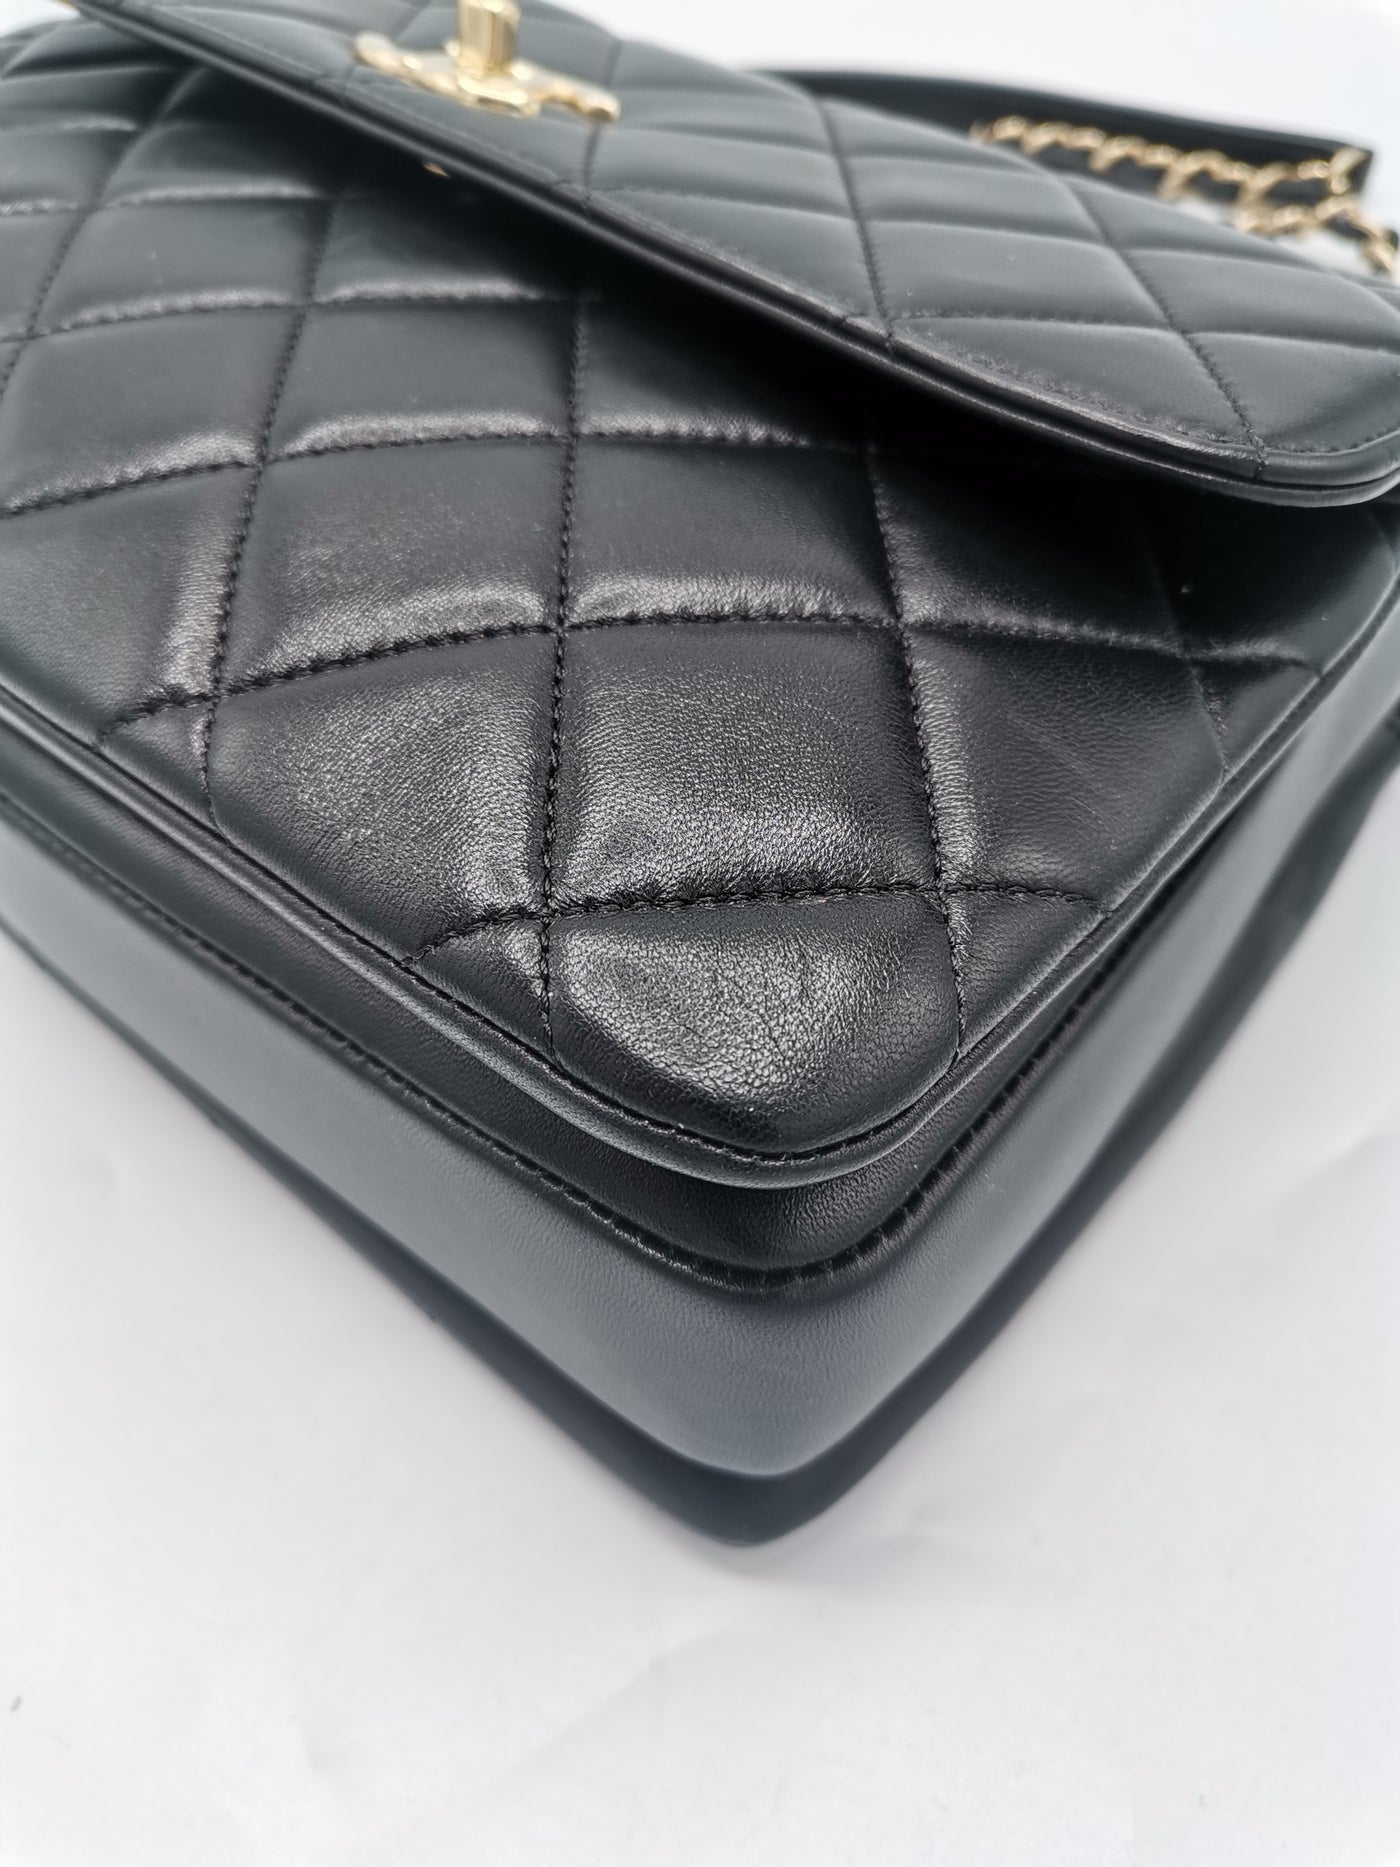 CHANEL CC Trendy Top handle Quilted bag